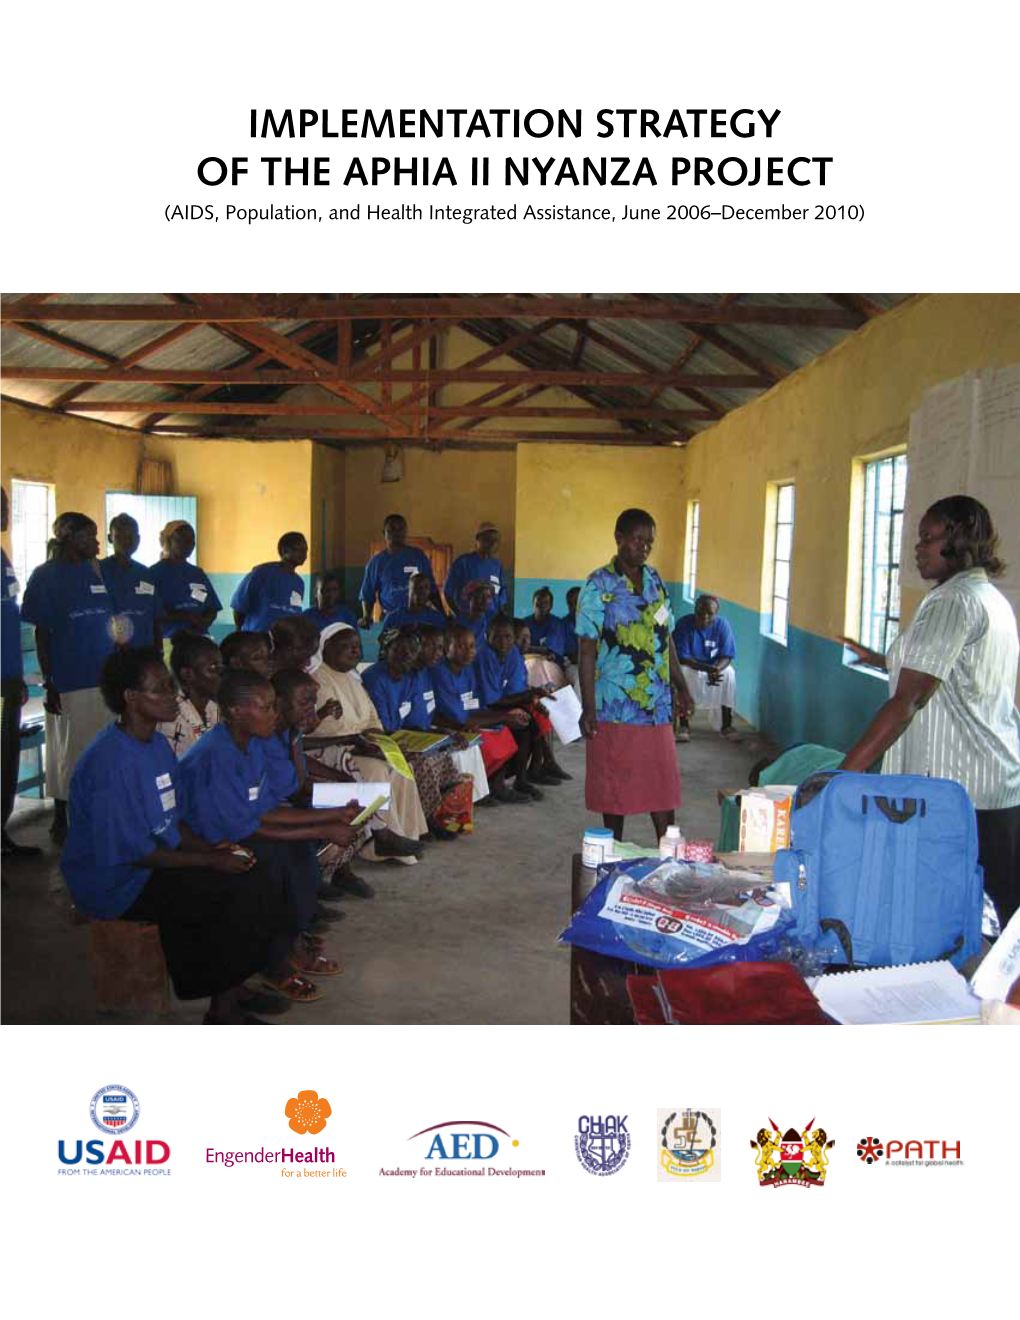 Implementation Strategy of the APHIA II Nyanza Project (AIDS, Population, and Health Integrated Assistance, June 2006–December 2010) Introduction